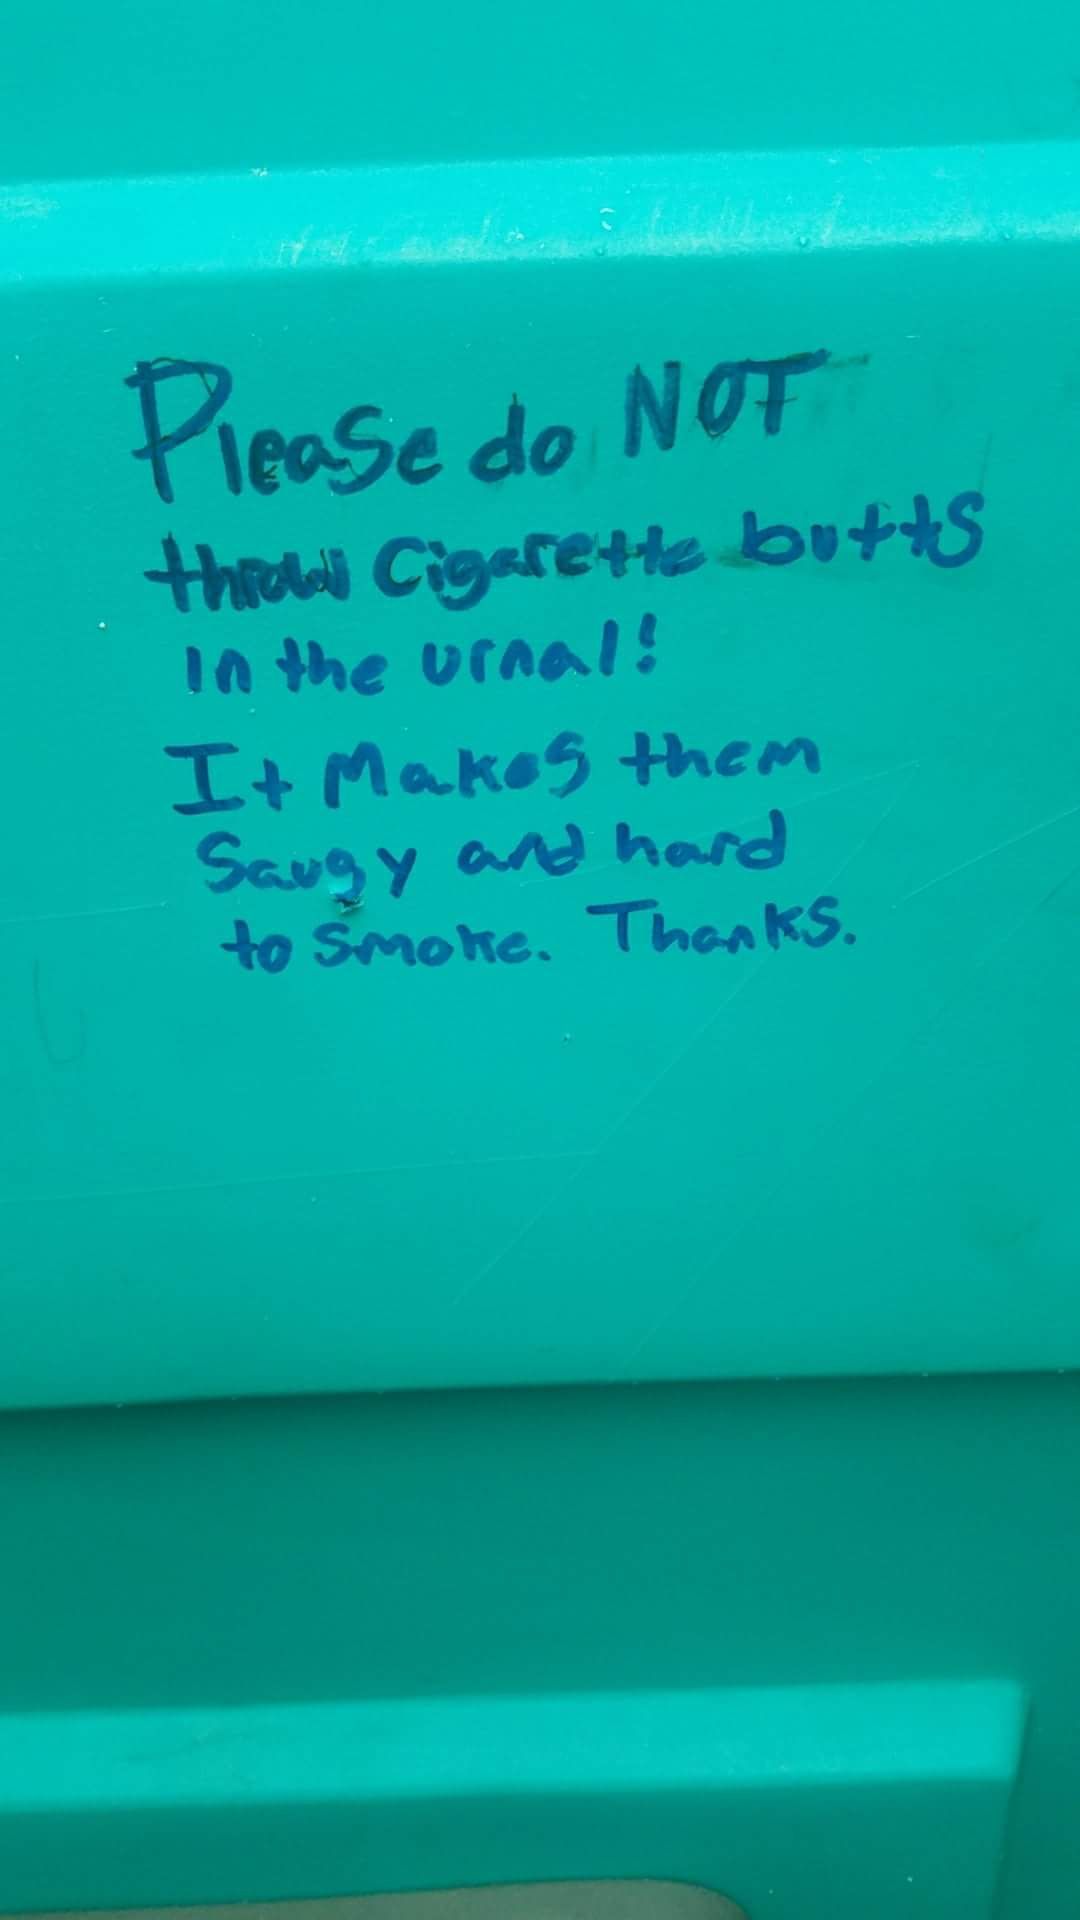 Please don't throw cigarette butts in urinal.